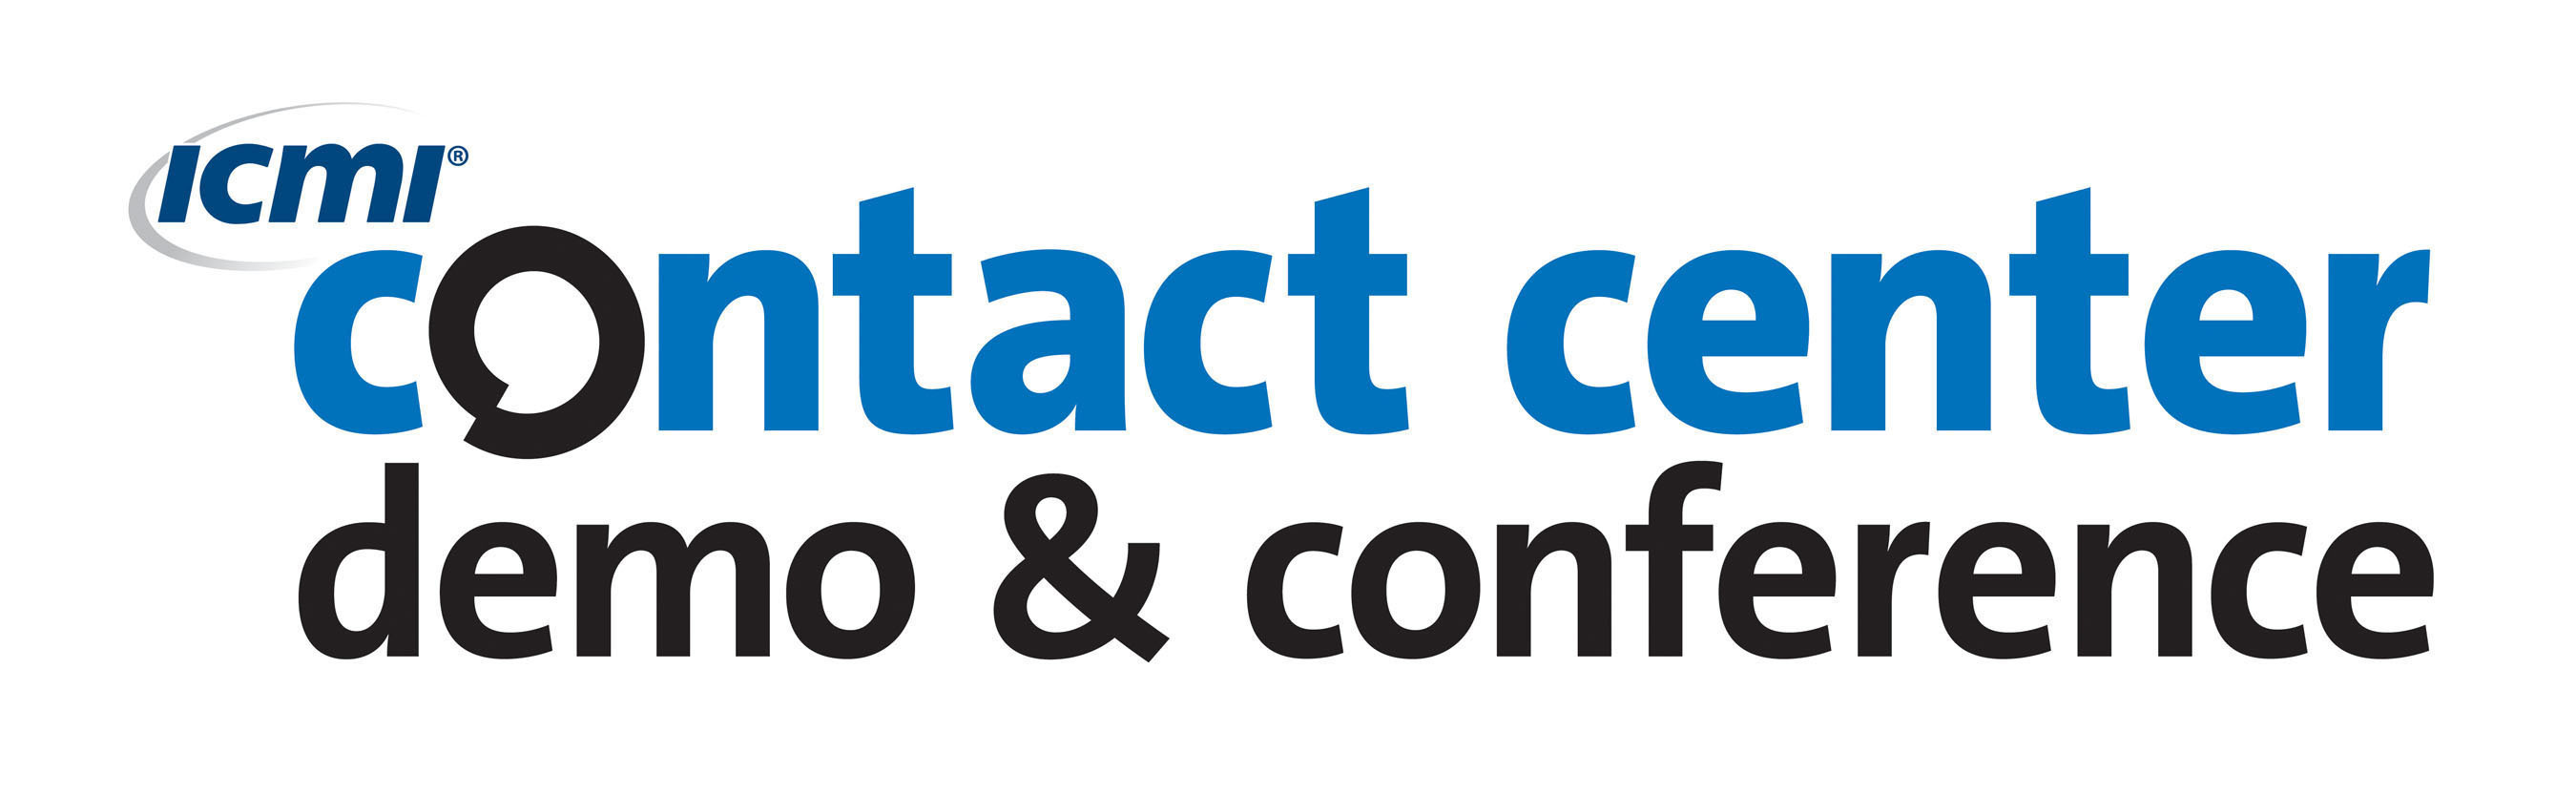 The 2015 Contact Center Demo & Conference will take place October 19-21, 2015, at the Rio in Las Vegas, Nevada